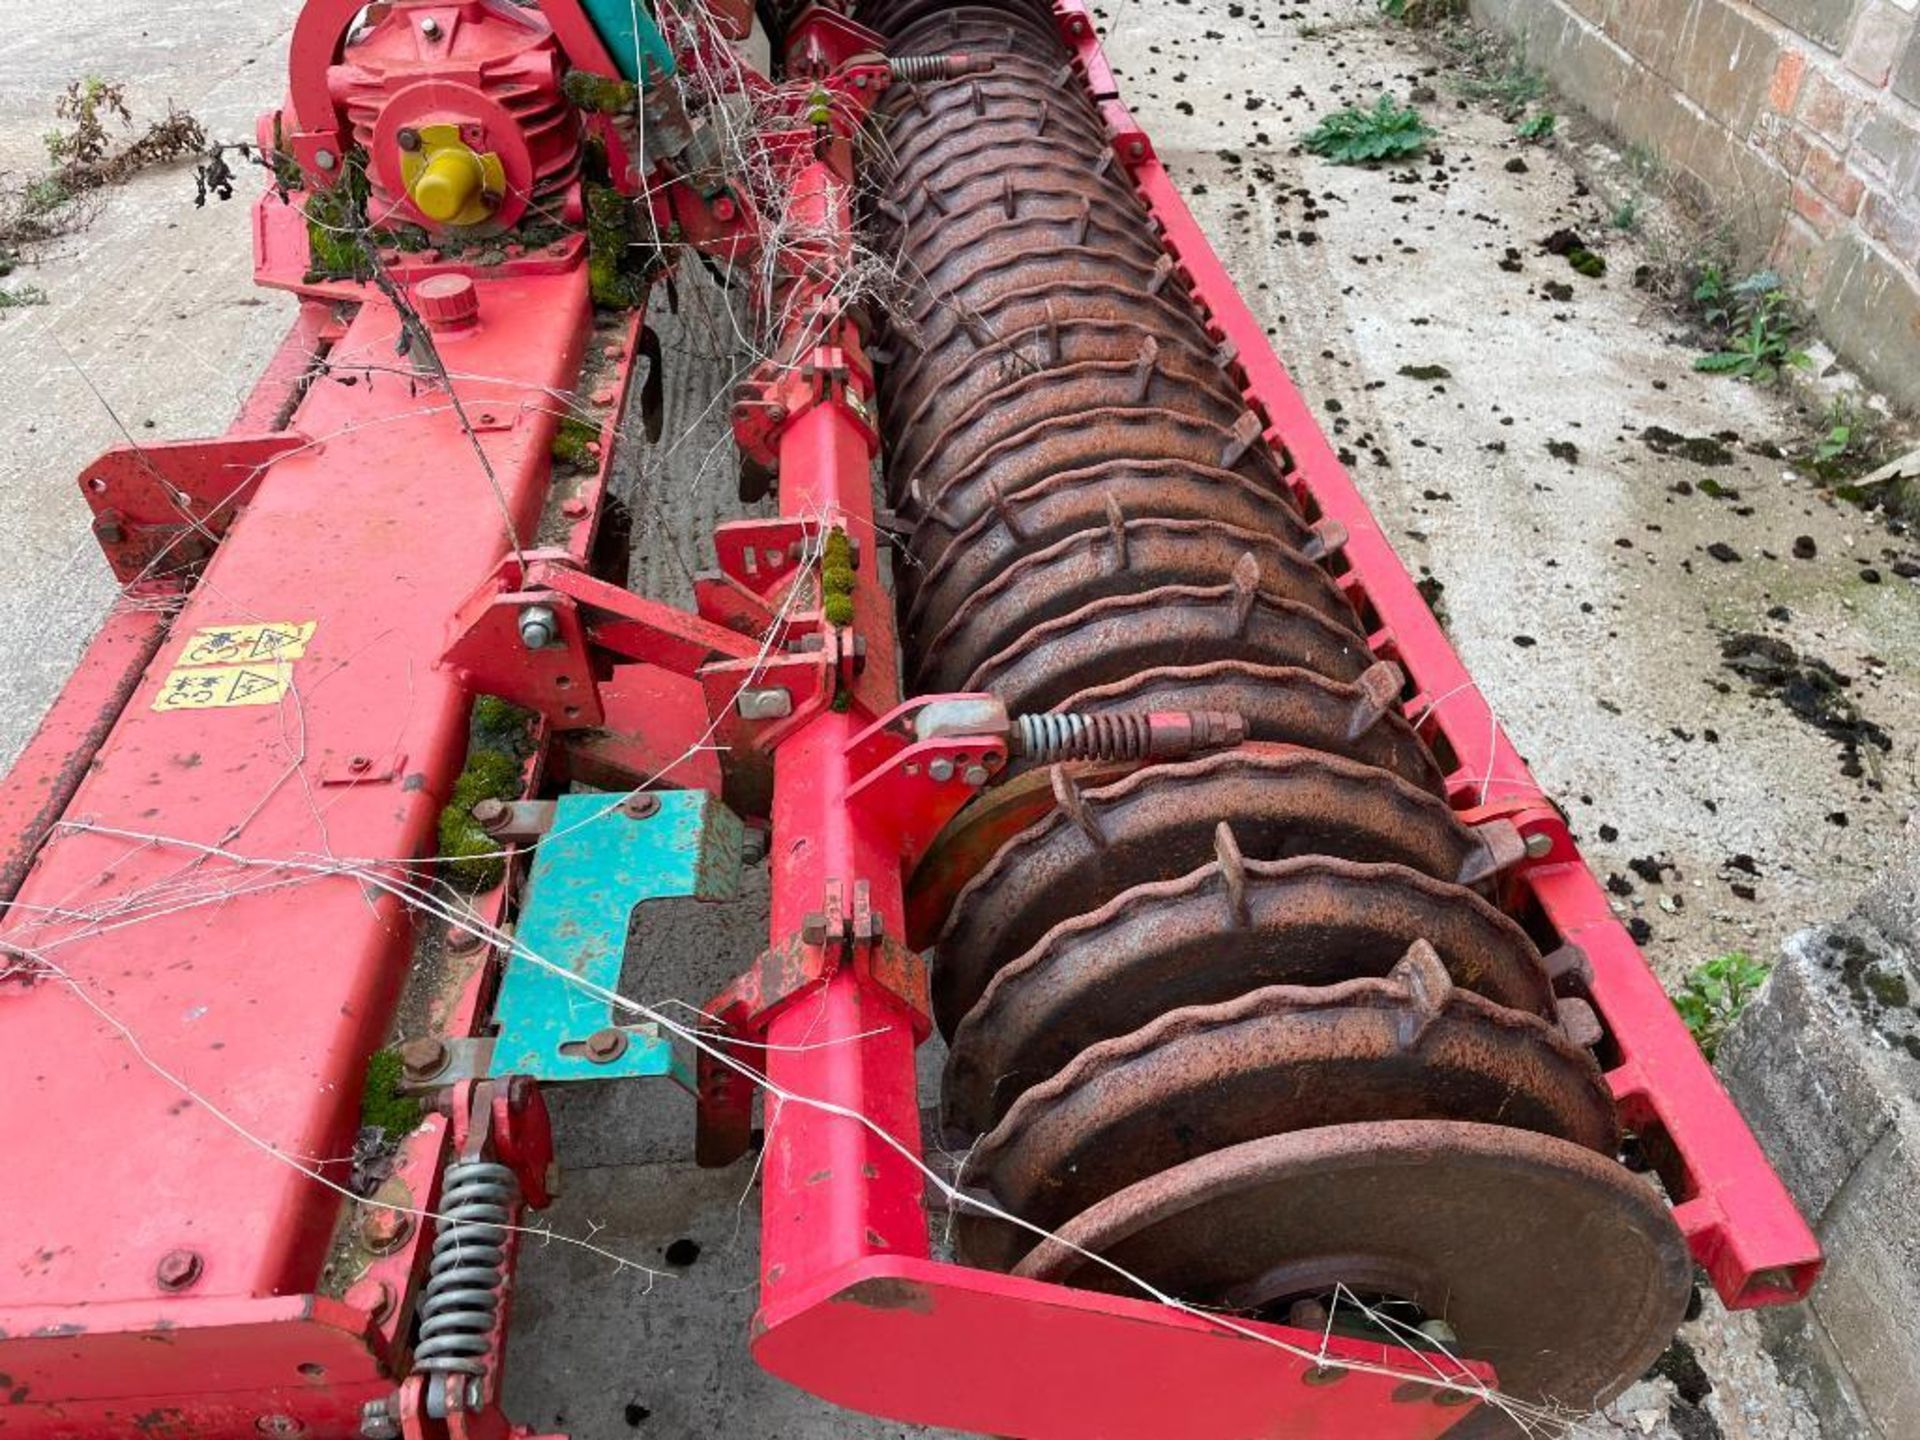 2008 Kverneland NGS/601/F40 6m hydraulic folding power harrow with rear Kerner packer and rear linka - Image 9 of 12